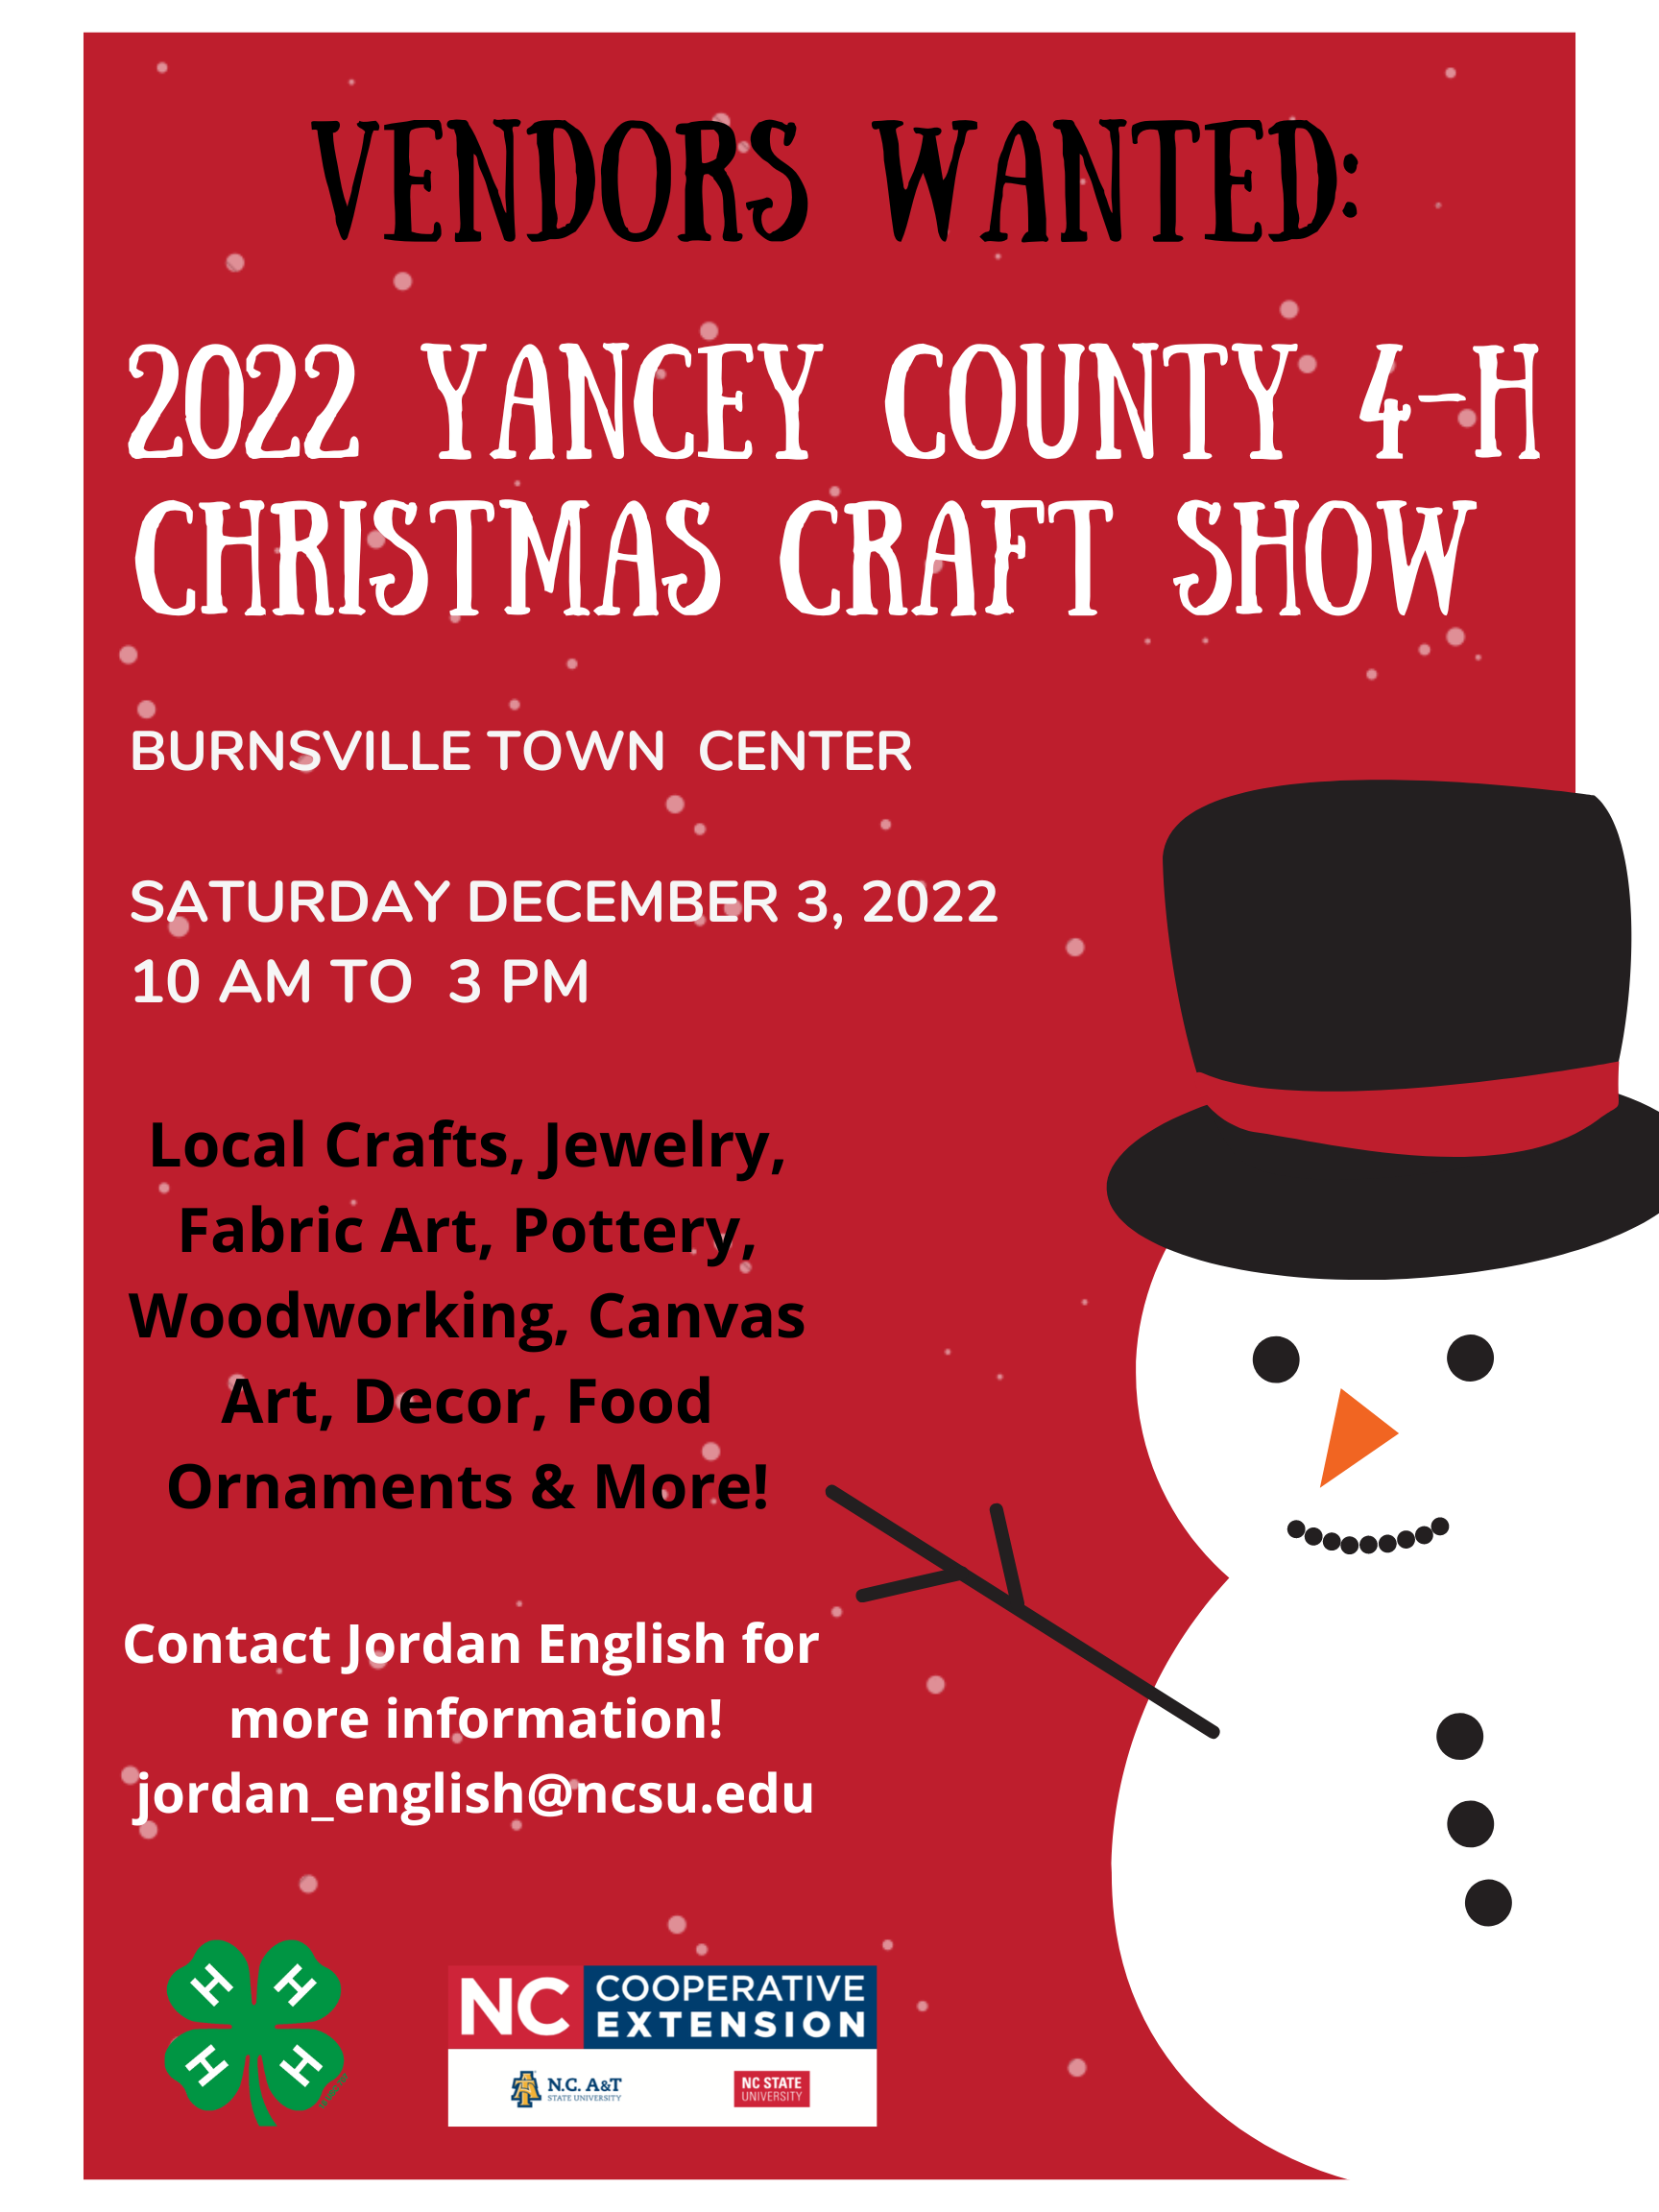 Vendors Wanted, 2022 Yancey County 4-H Christmas Craft Show. Burnsville Town Center.